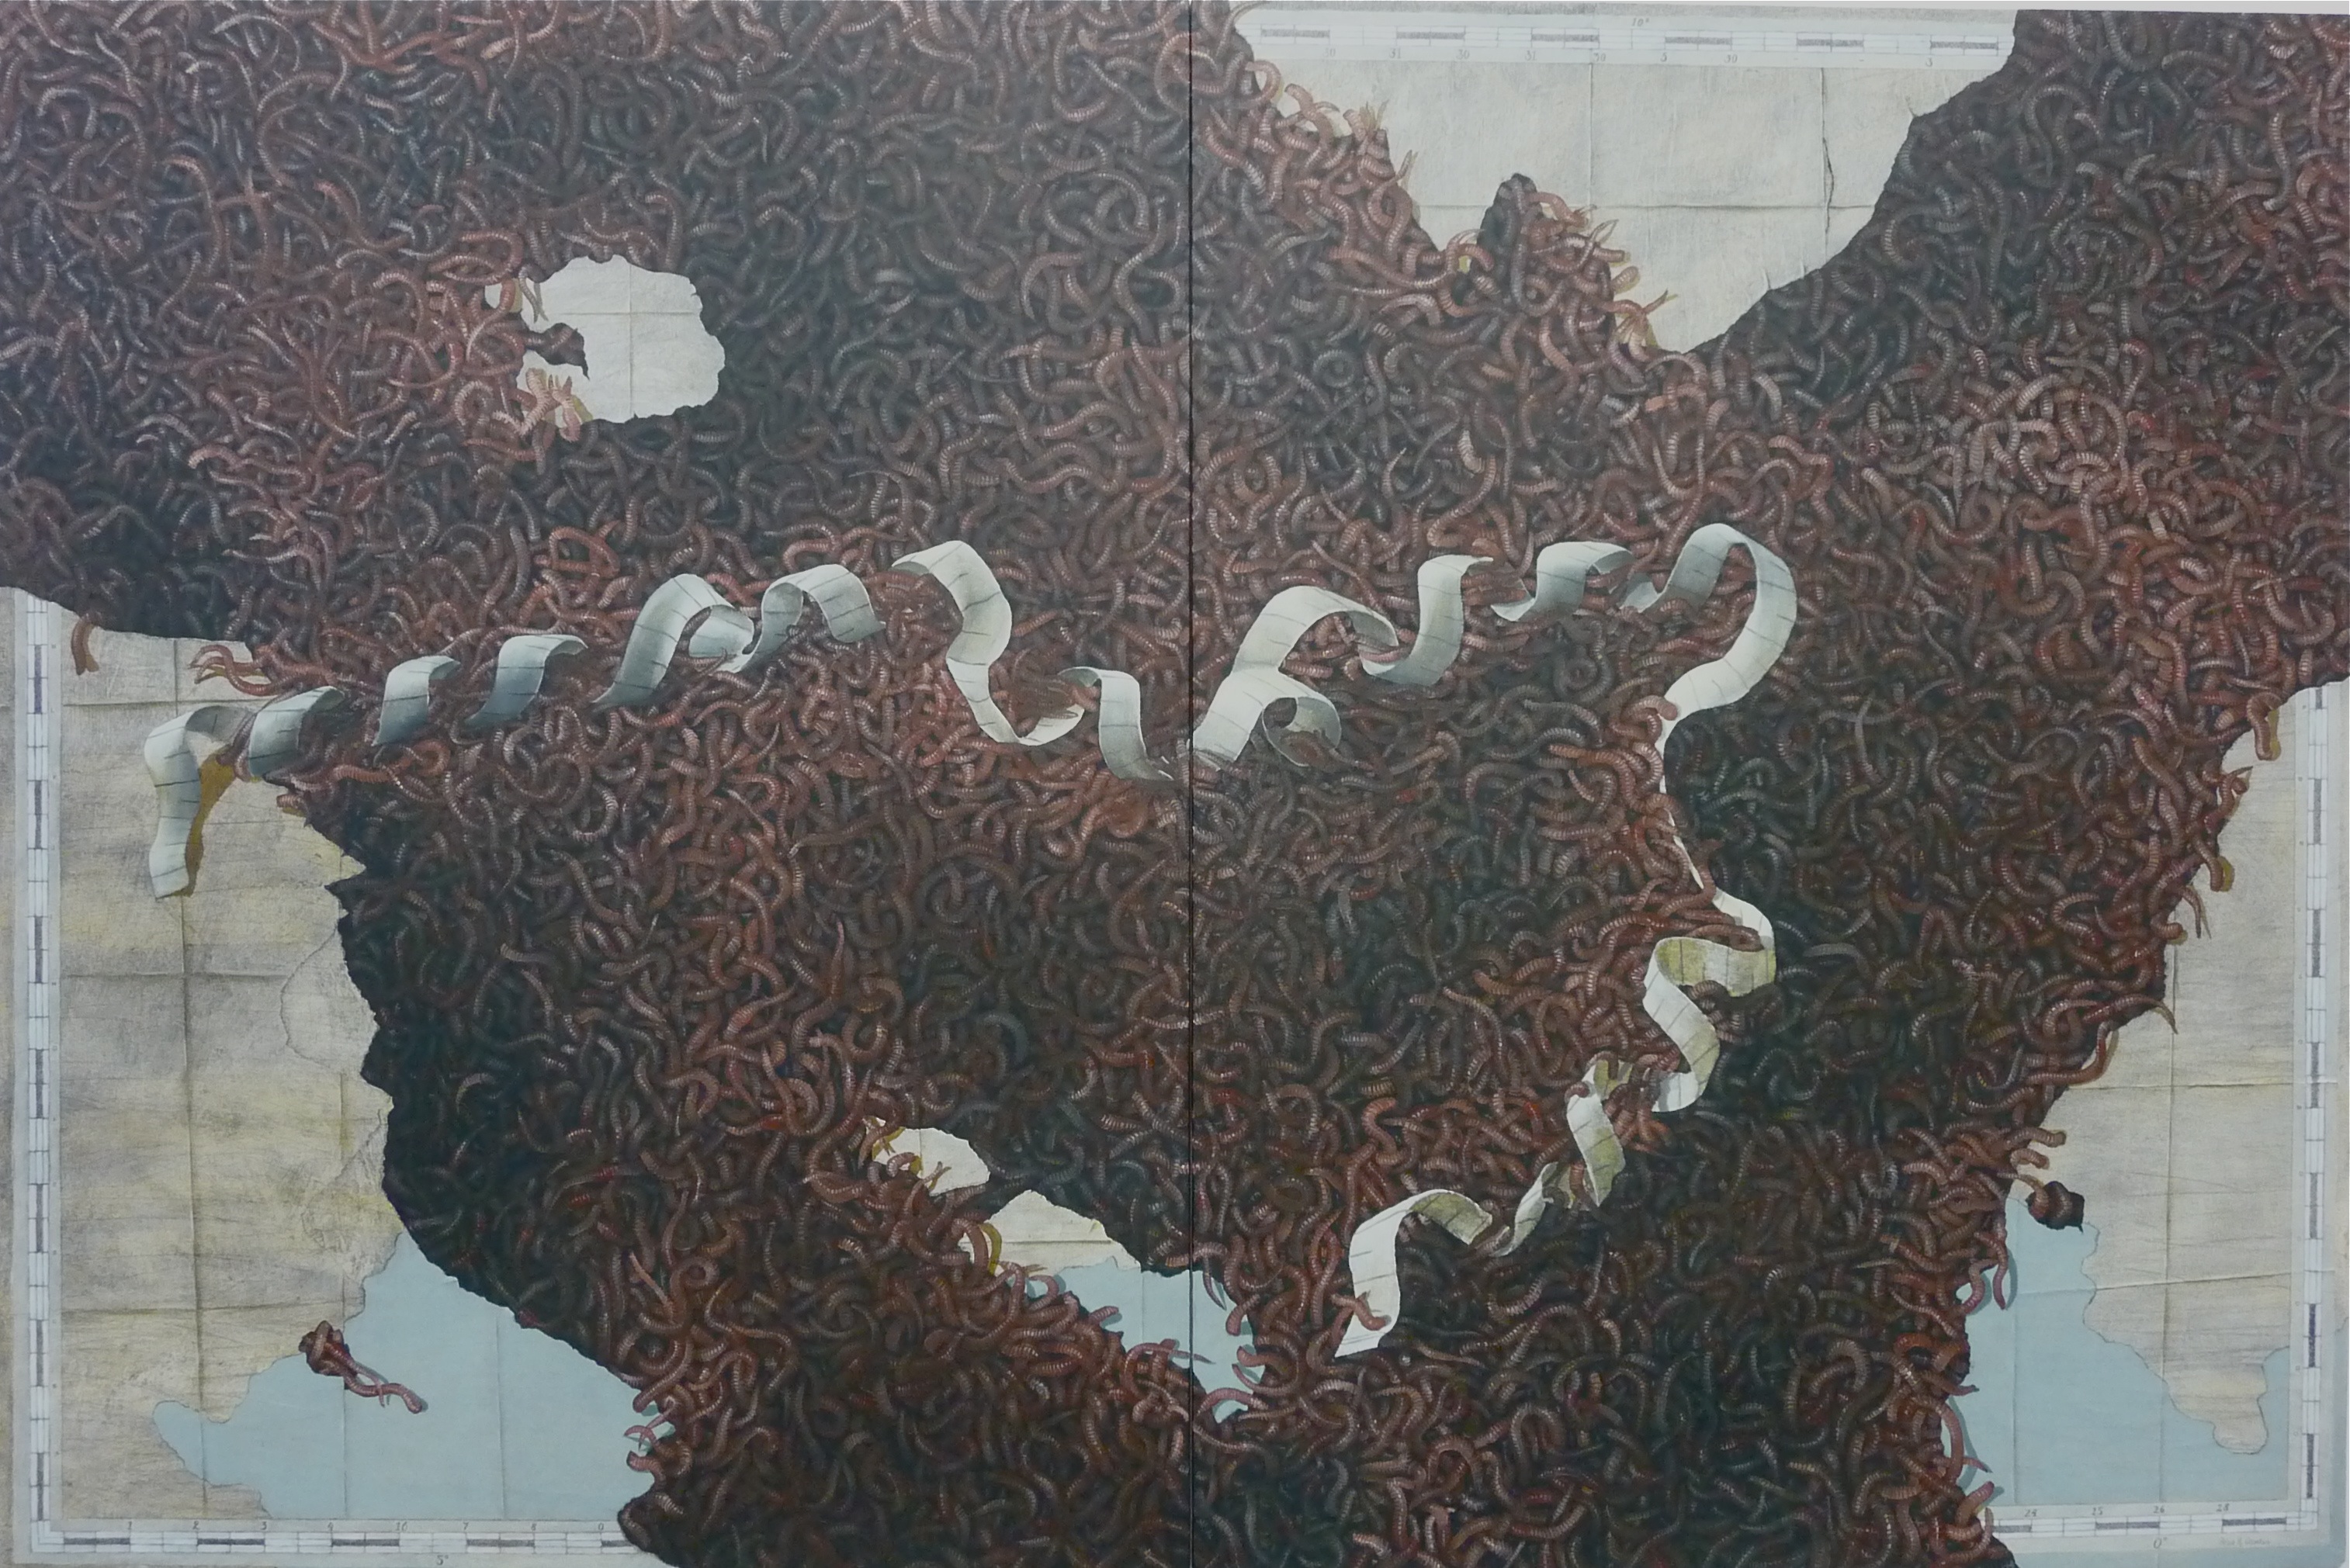 The Measured Expression of a Rogue Map. 2012. Oil on Canvas. 180x120cm.